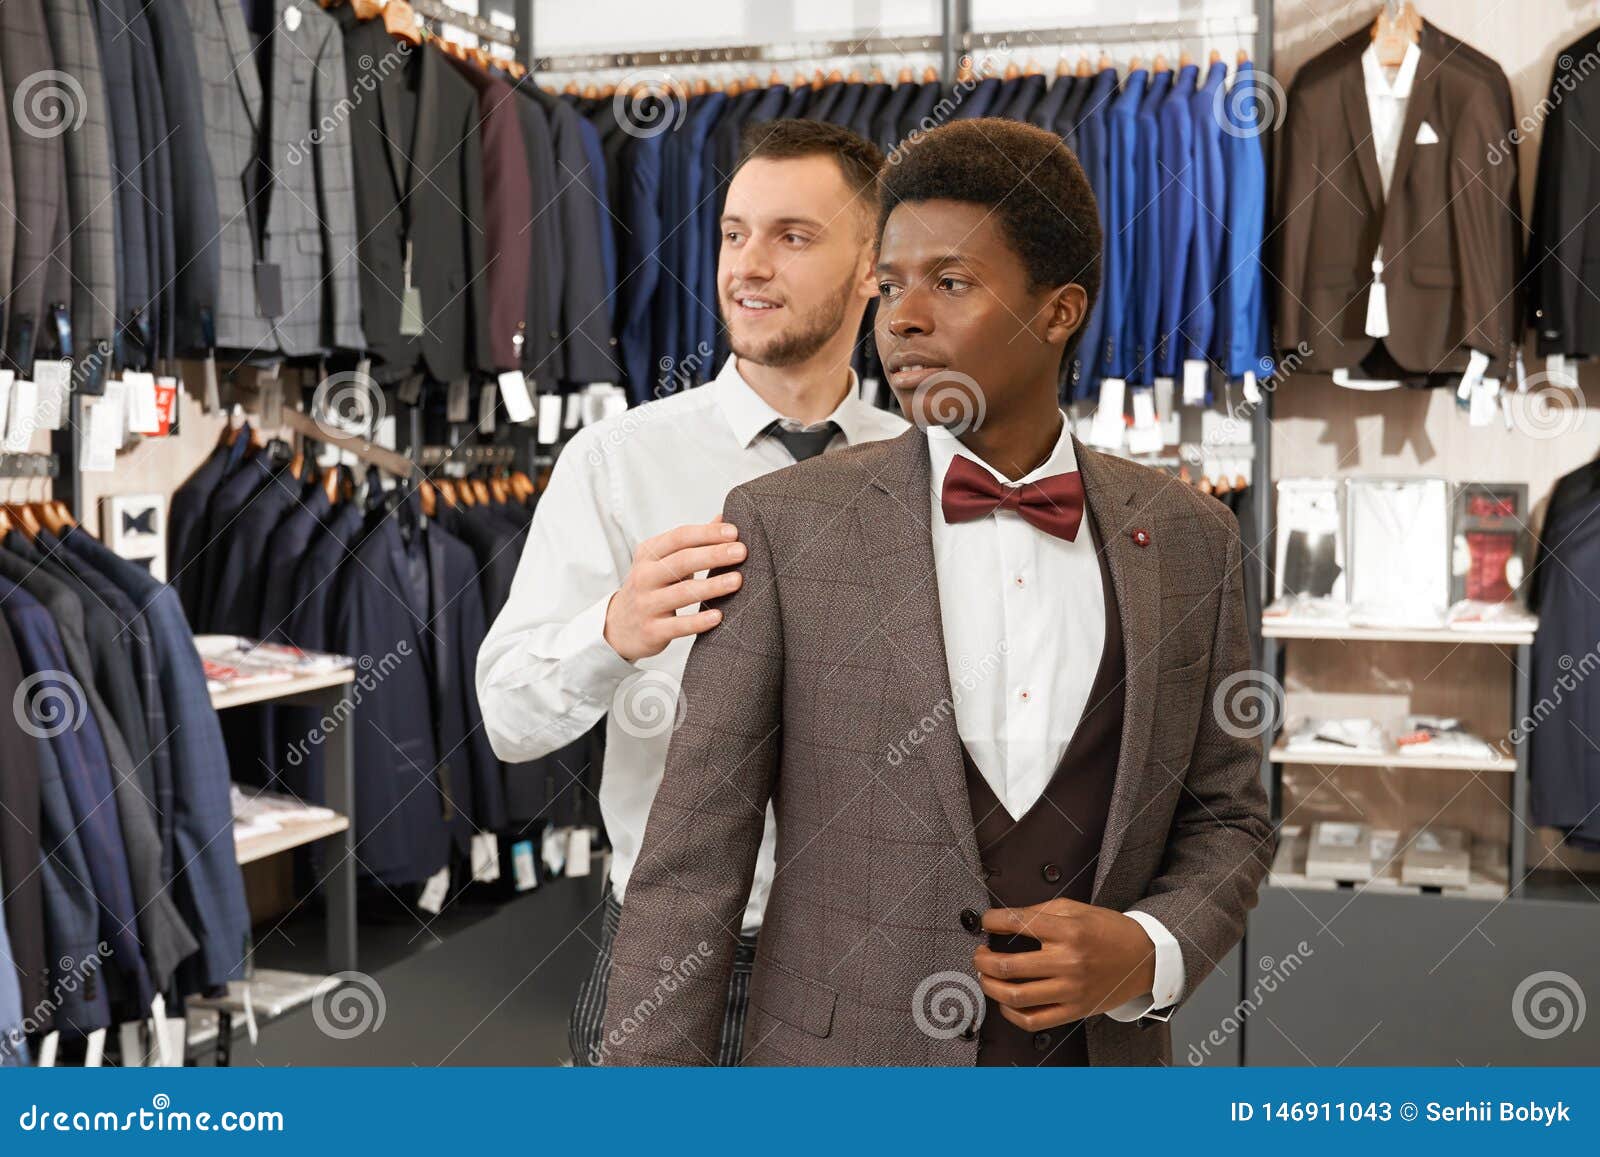 Young Man Trying on and Choosing Suit in Shop. Stock Image - Image of ...